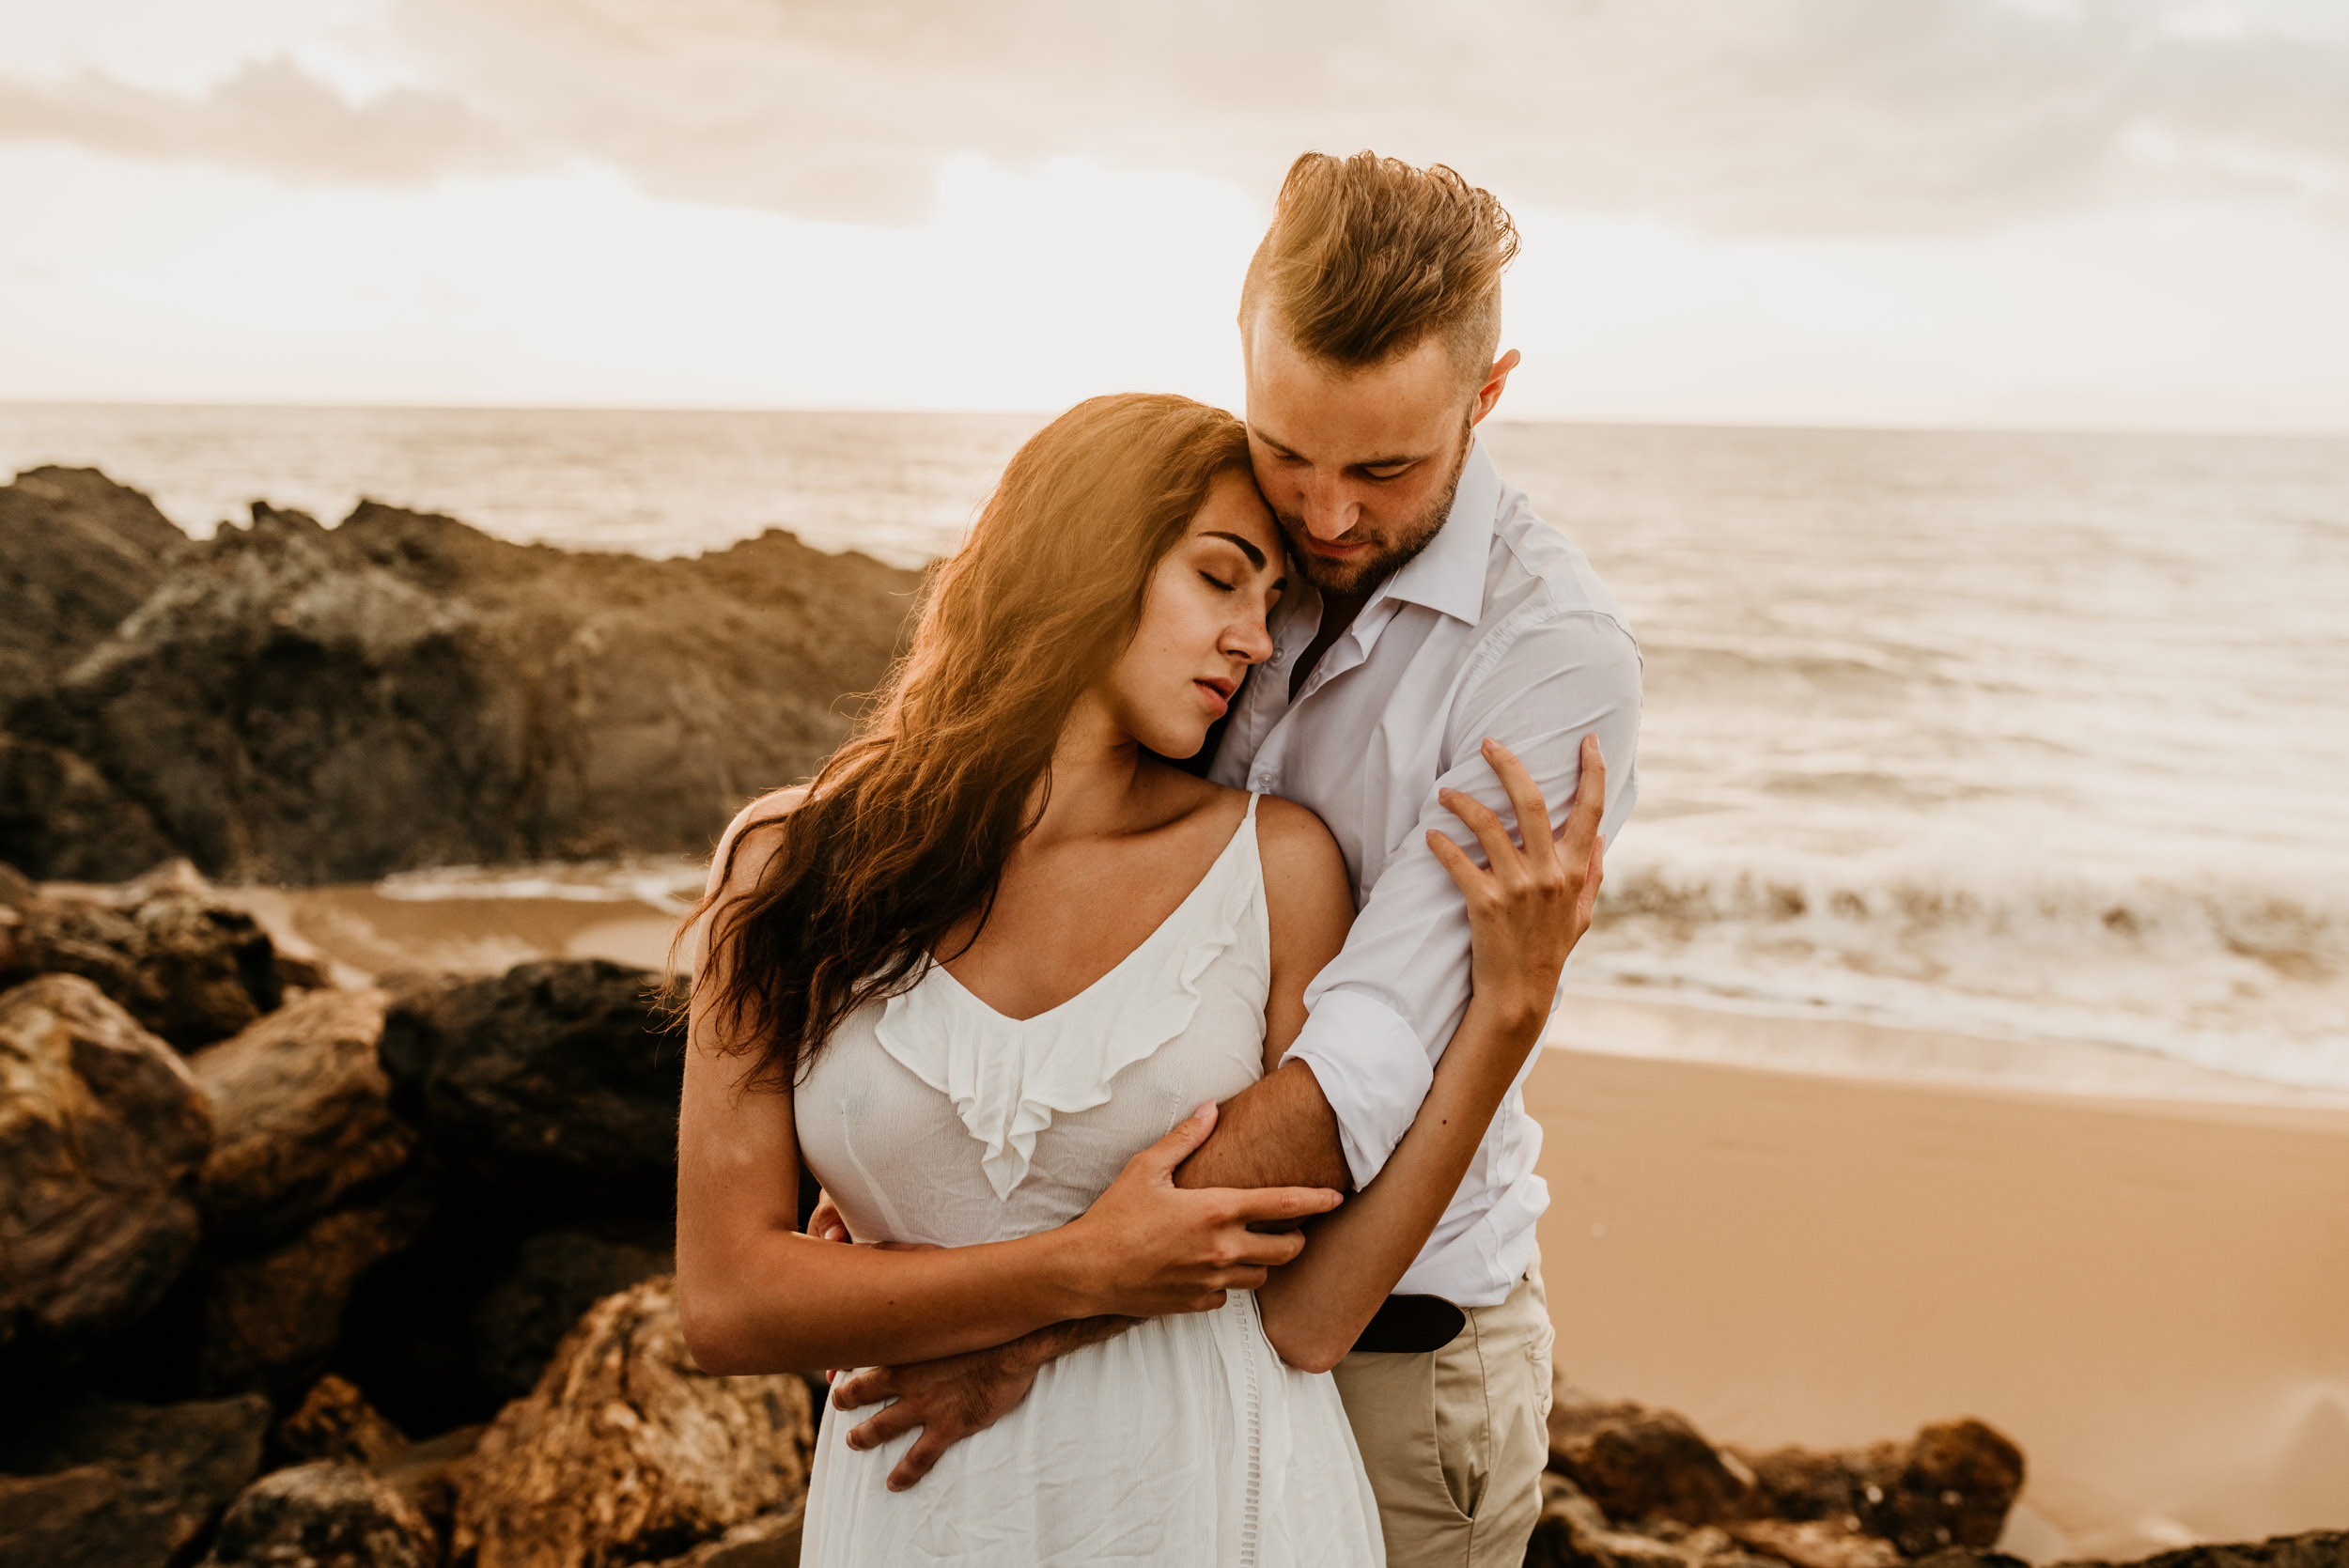 The Raw Photographer - Cairns Wedding Photographer - Engaged Engagement - Beach location - Candid Photography Queensland-34.jpg